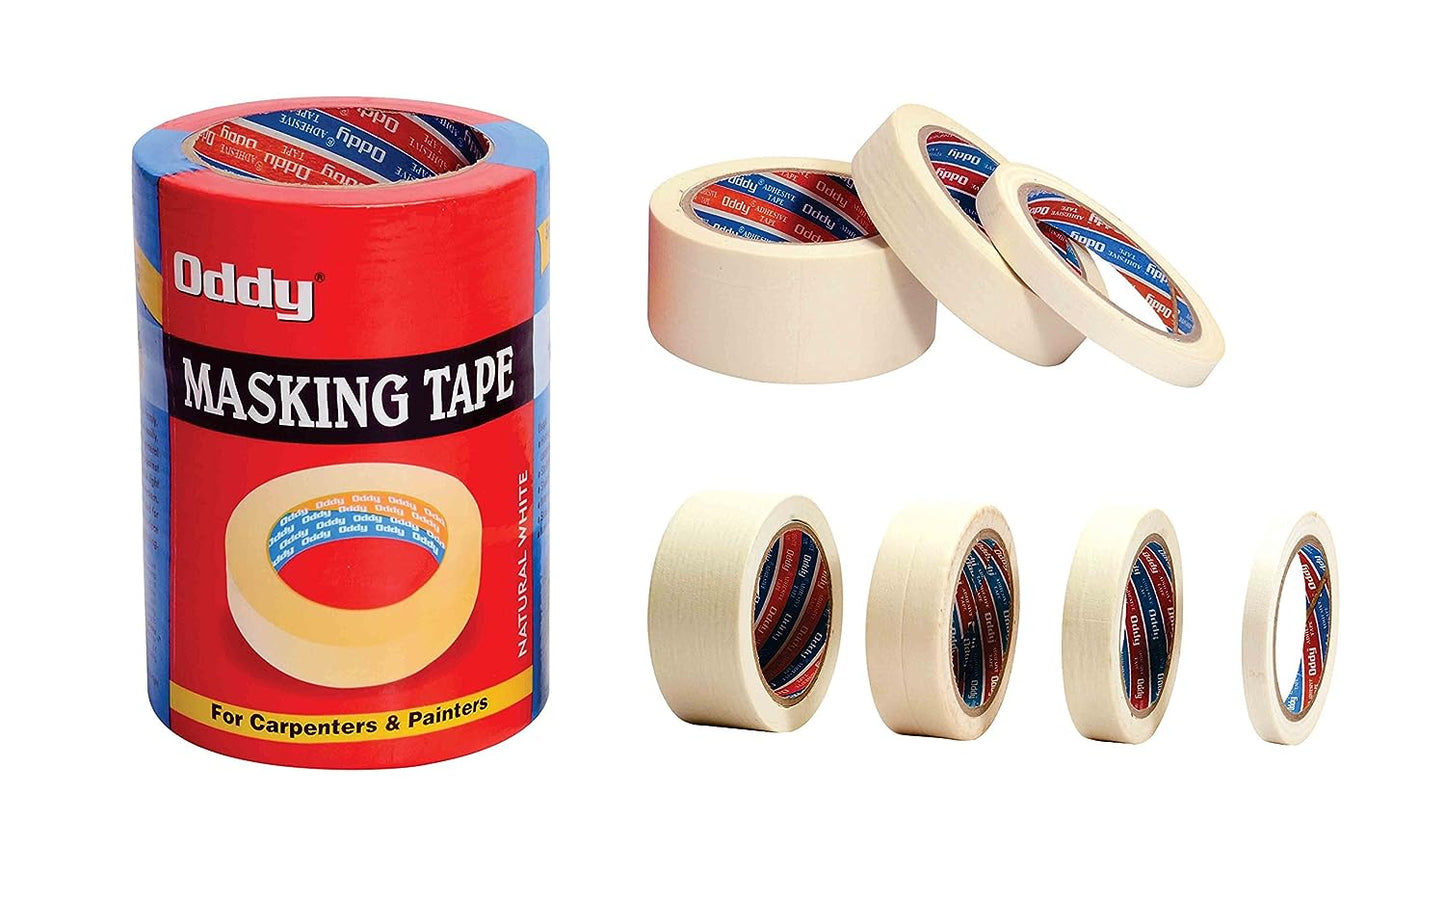 Oddy 72mm Super Strong Self Adhesive Masking Tape-20 Mtrs. (Set of 2)